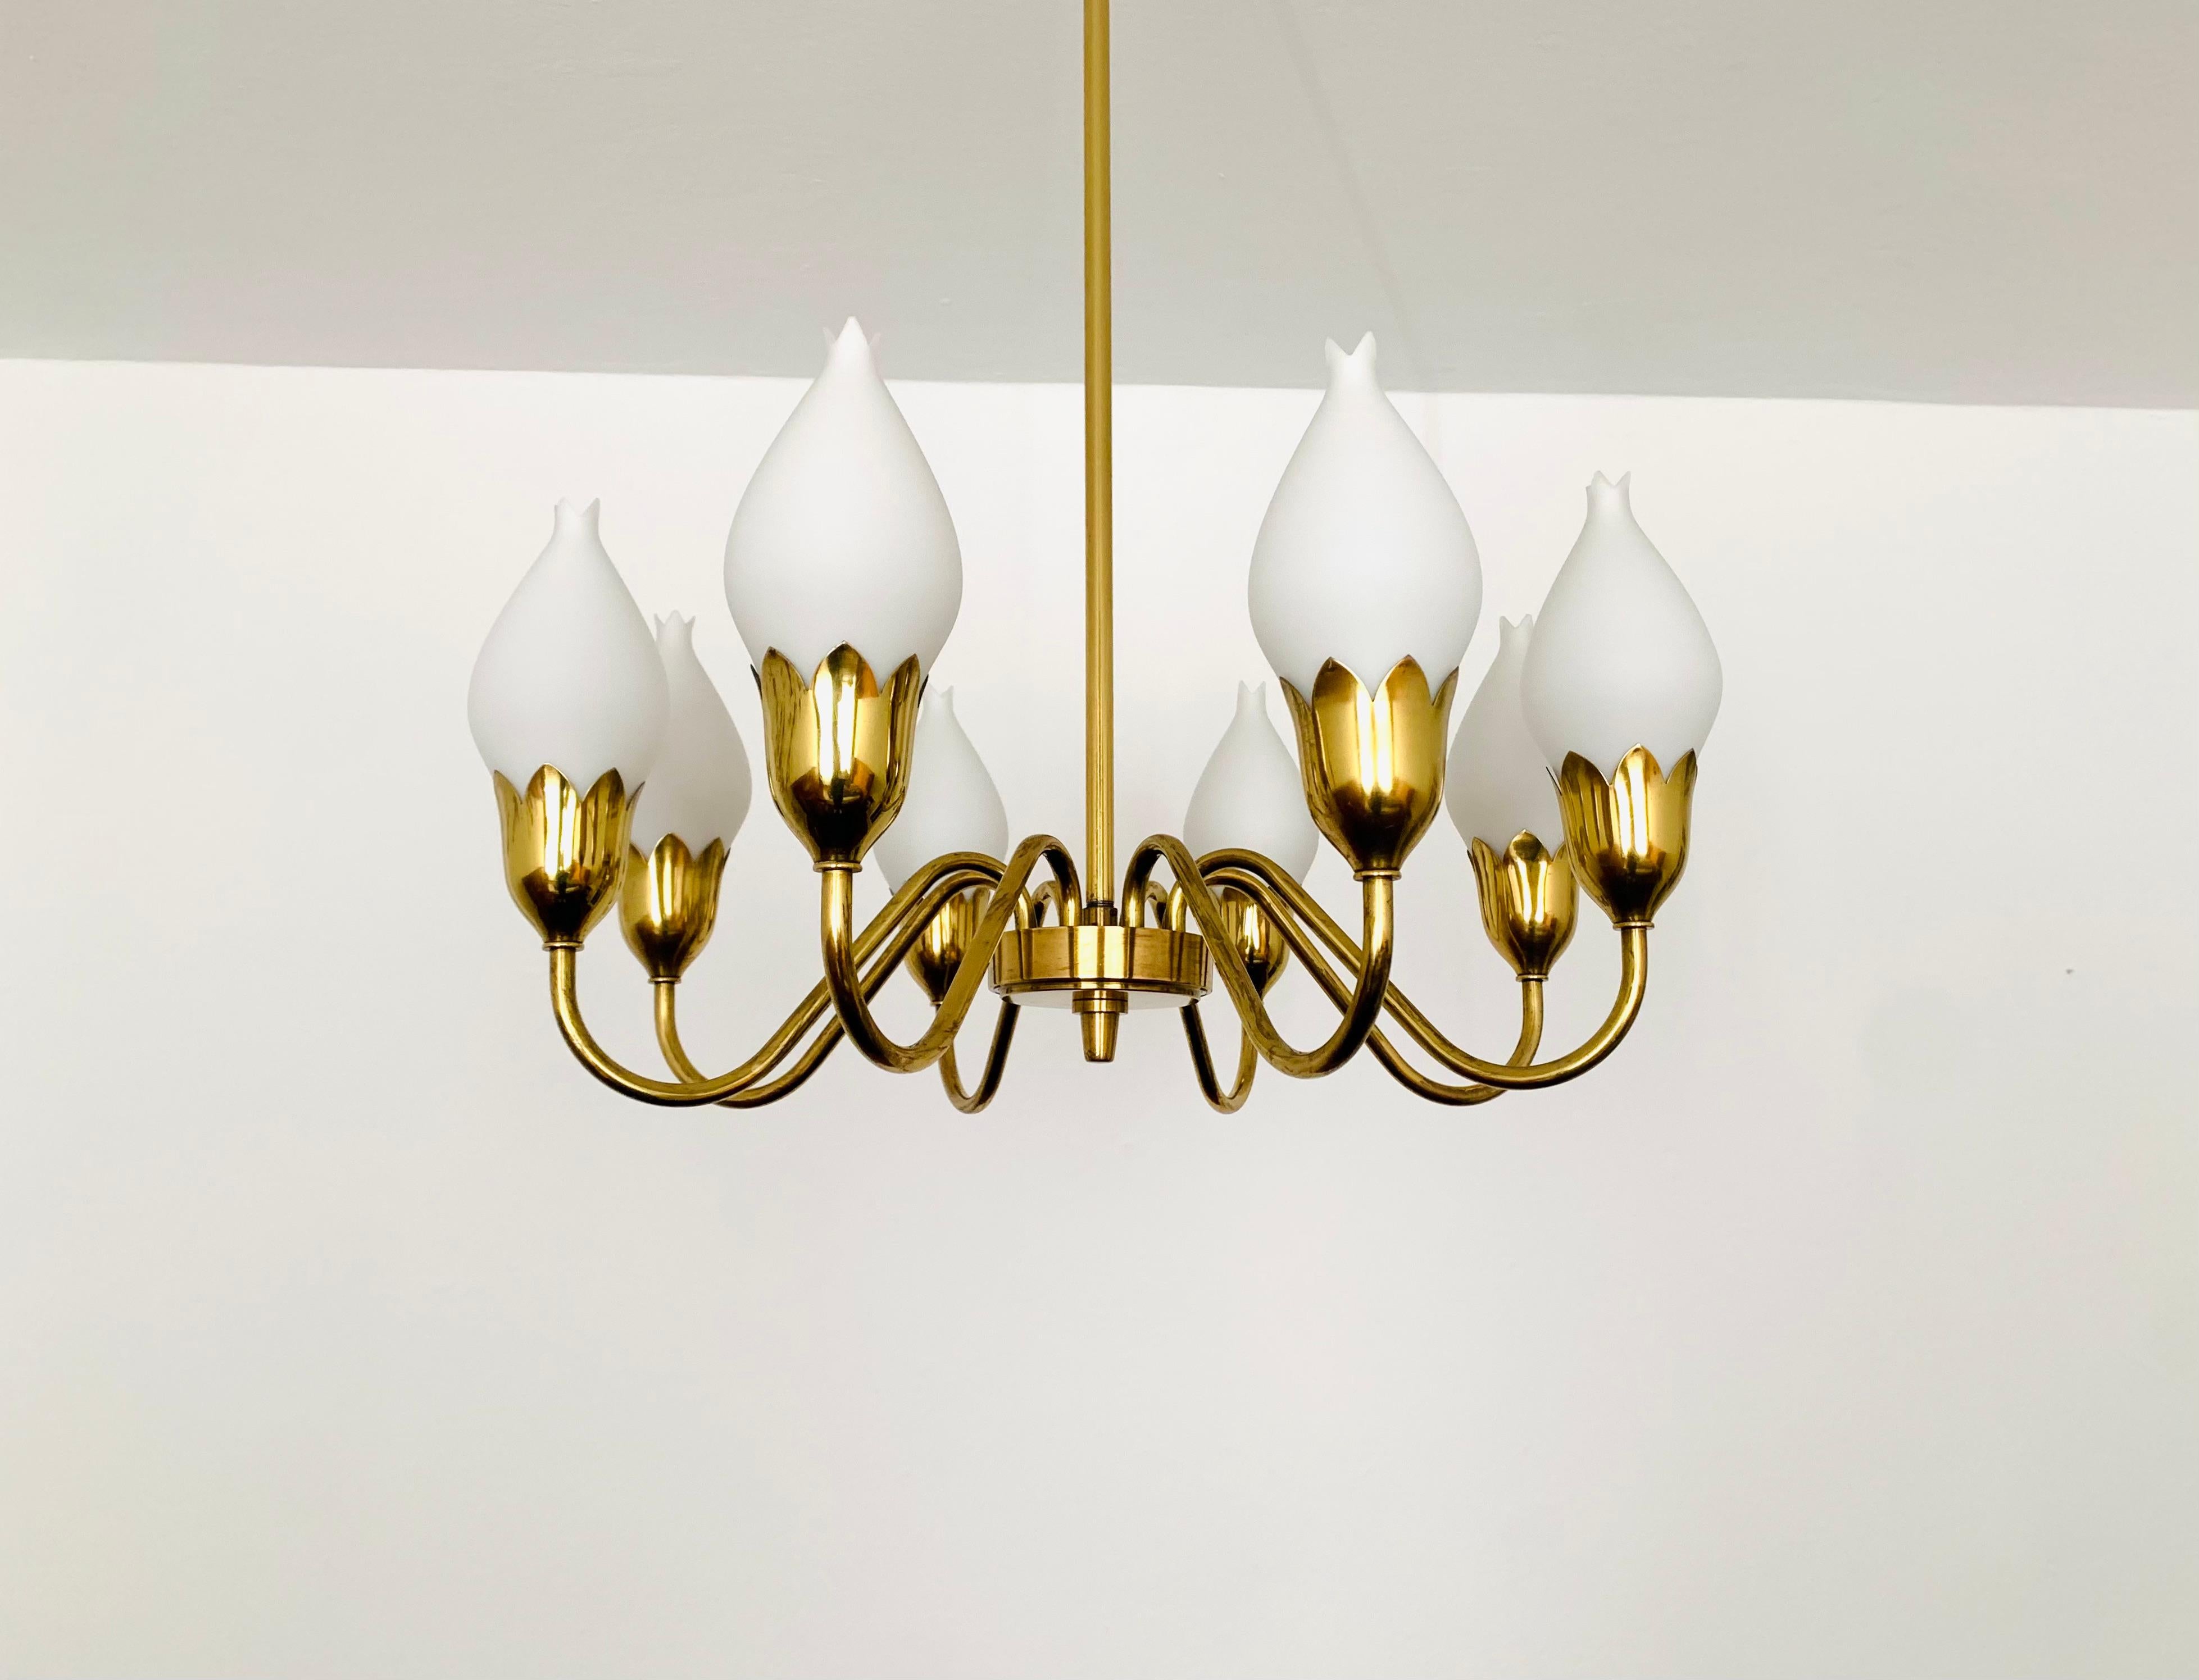 Breathtaking brass chandelier from the 1960s.
Very luxurious design and high -quality workmanship.
The lamp is a real asset and an absolute favorite for every home.
There is a cozy light.

Design: Fog and Morup

Condition:

Very good vintage